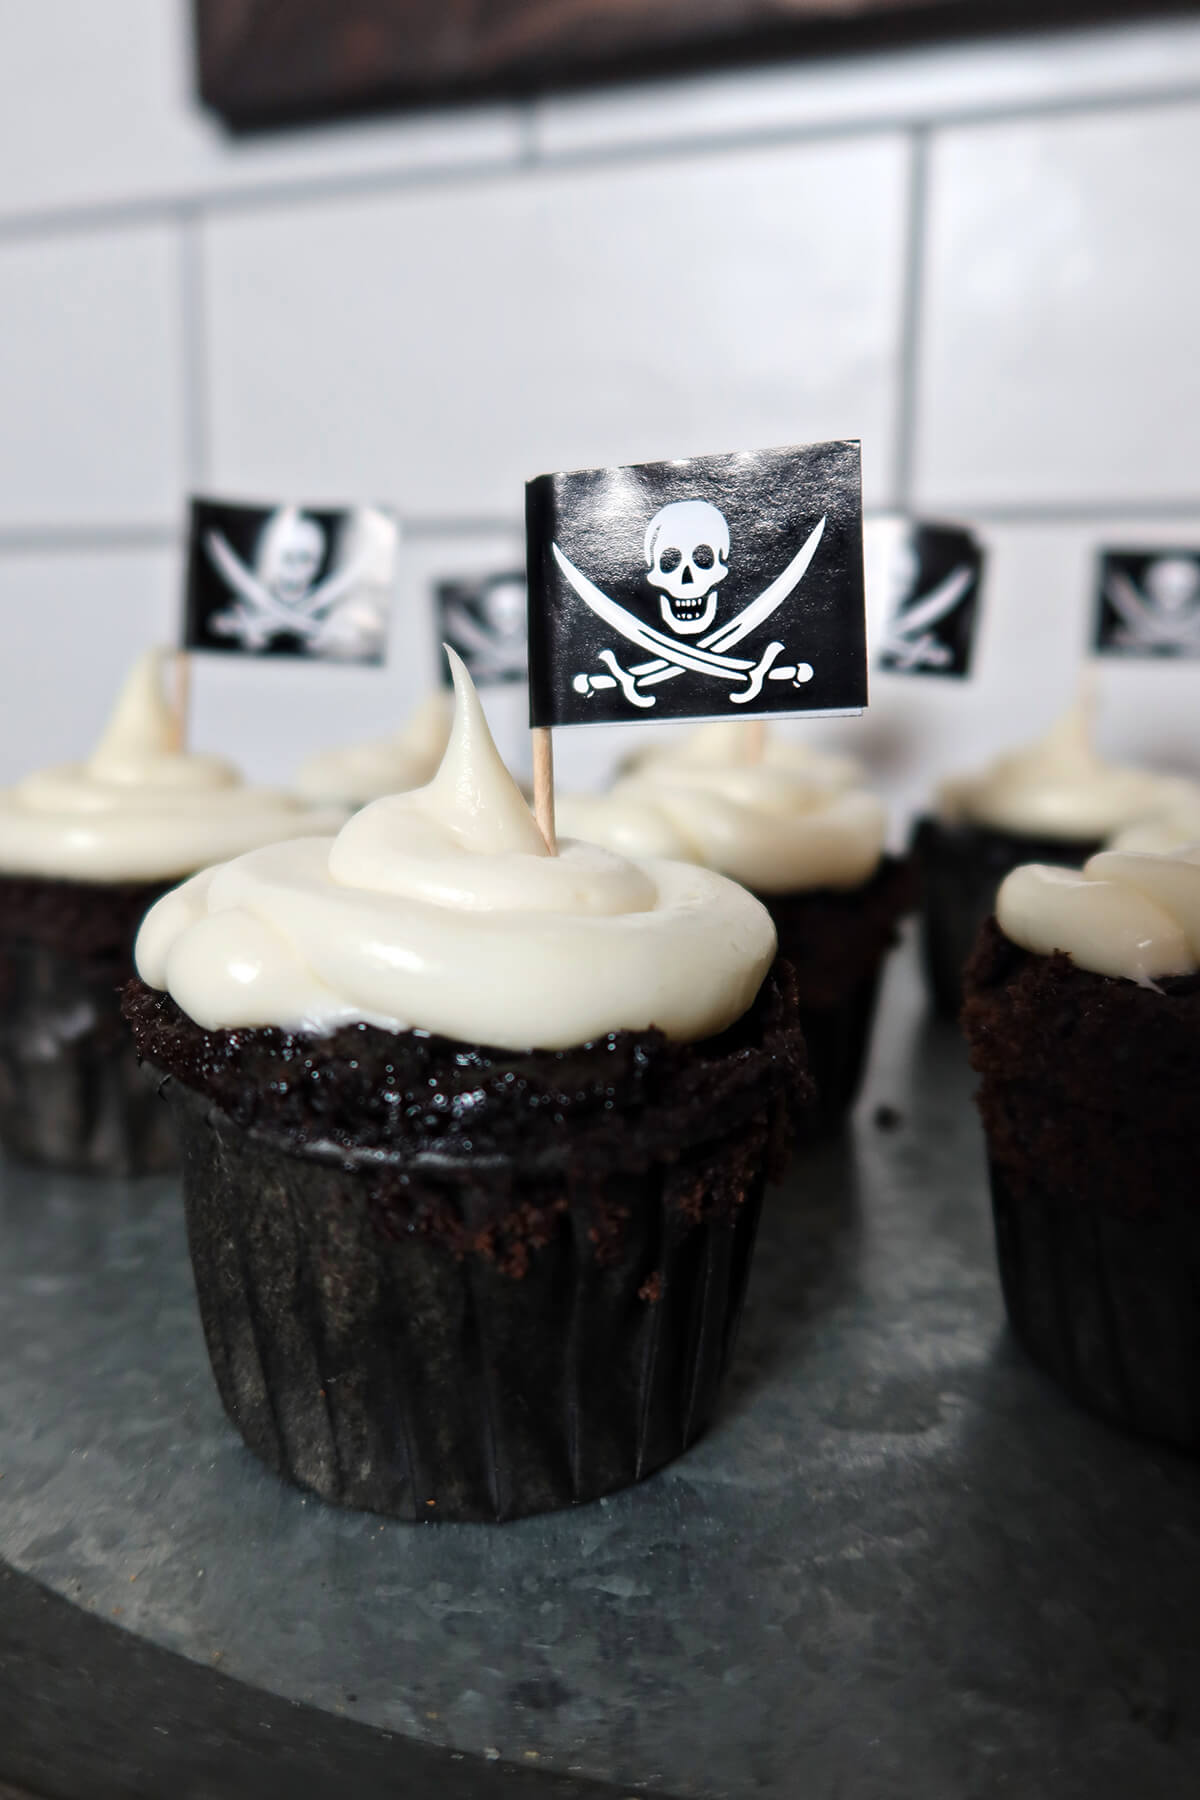 pirate party cupcakes - chocolate cupcakes with pirate flags